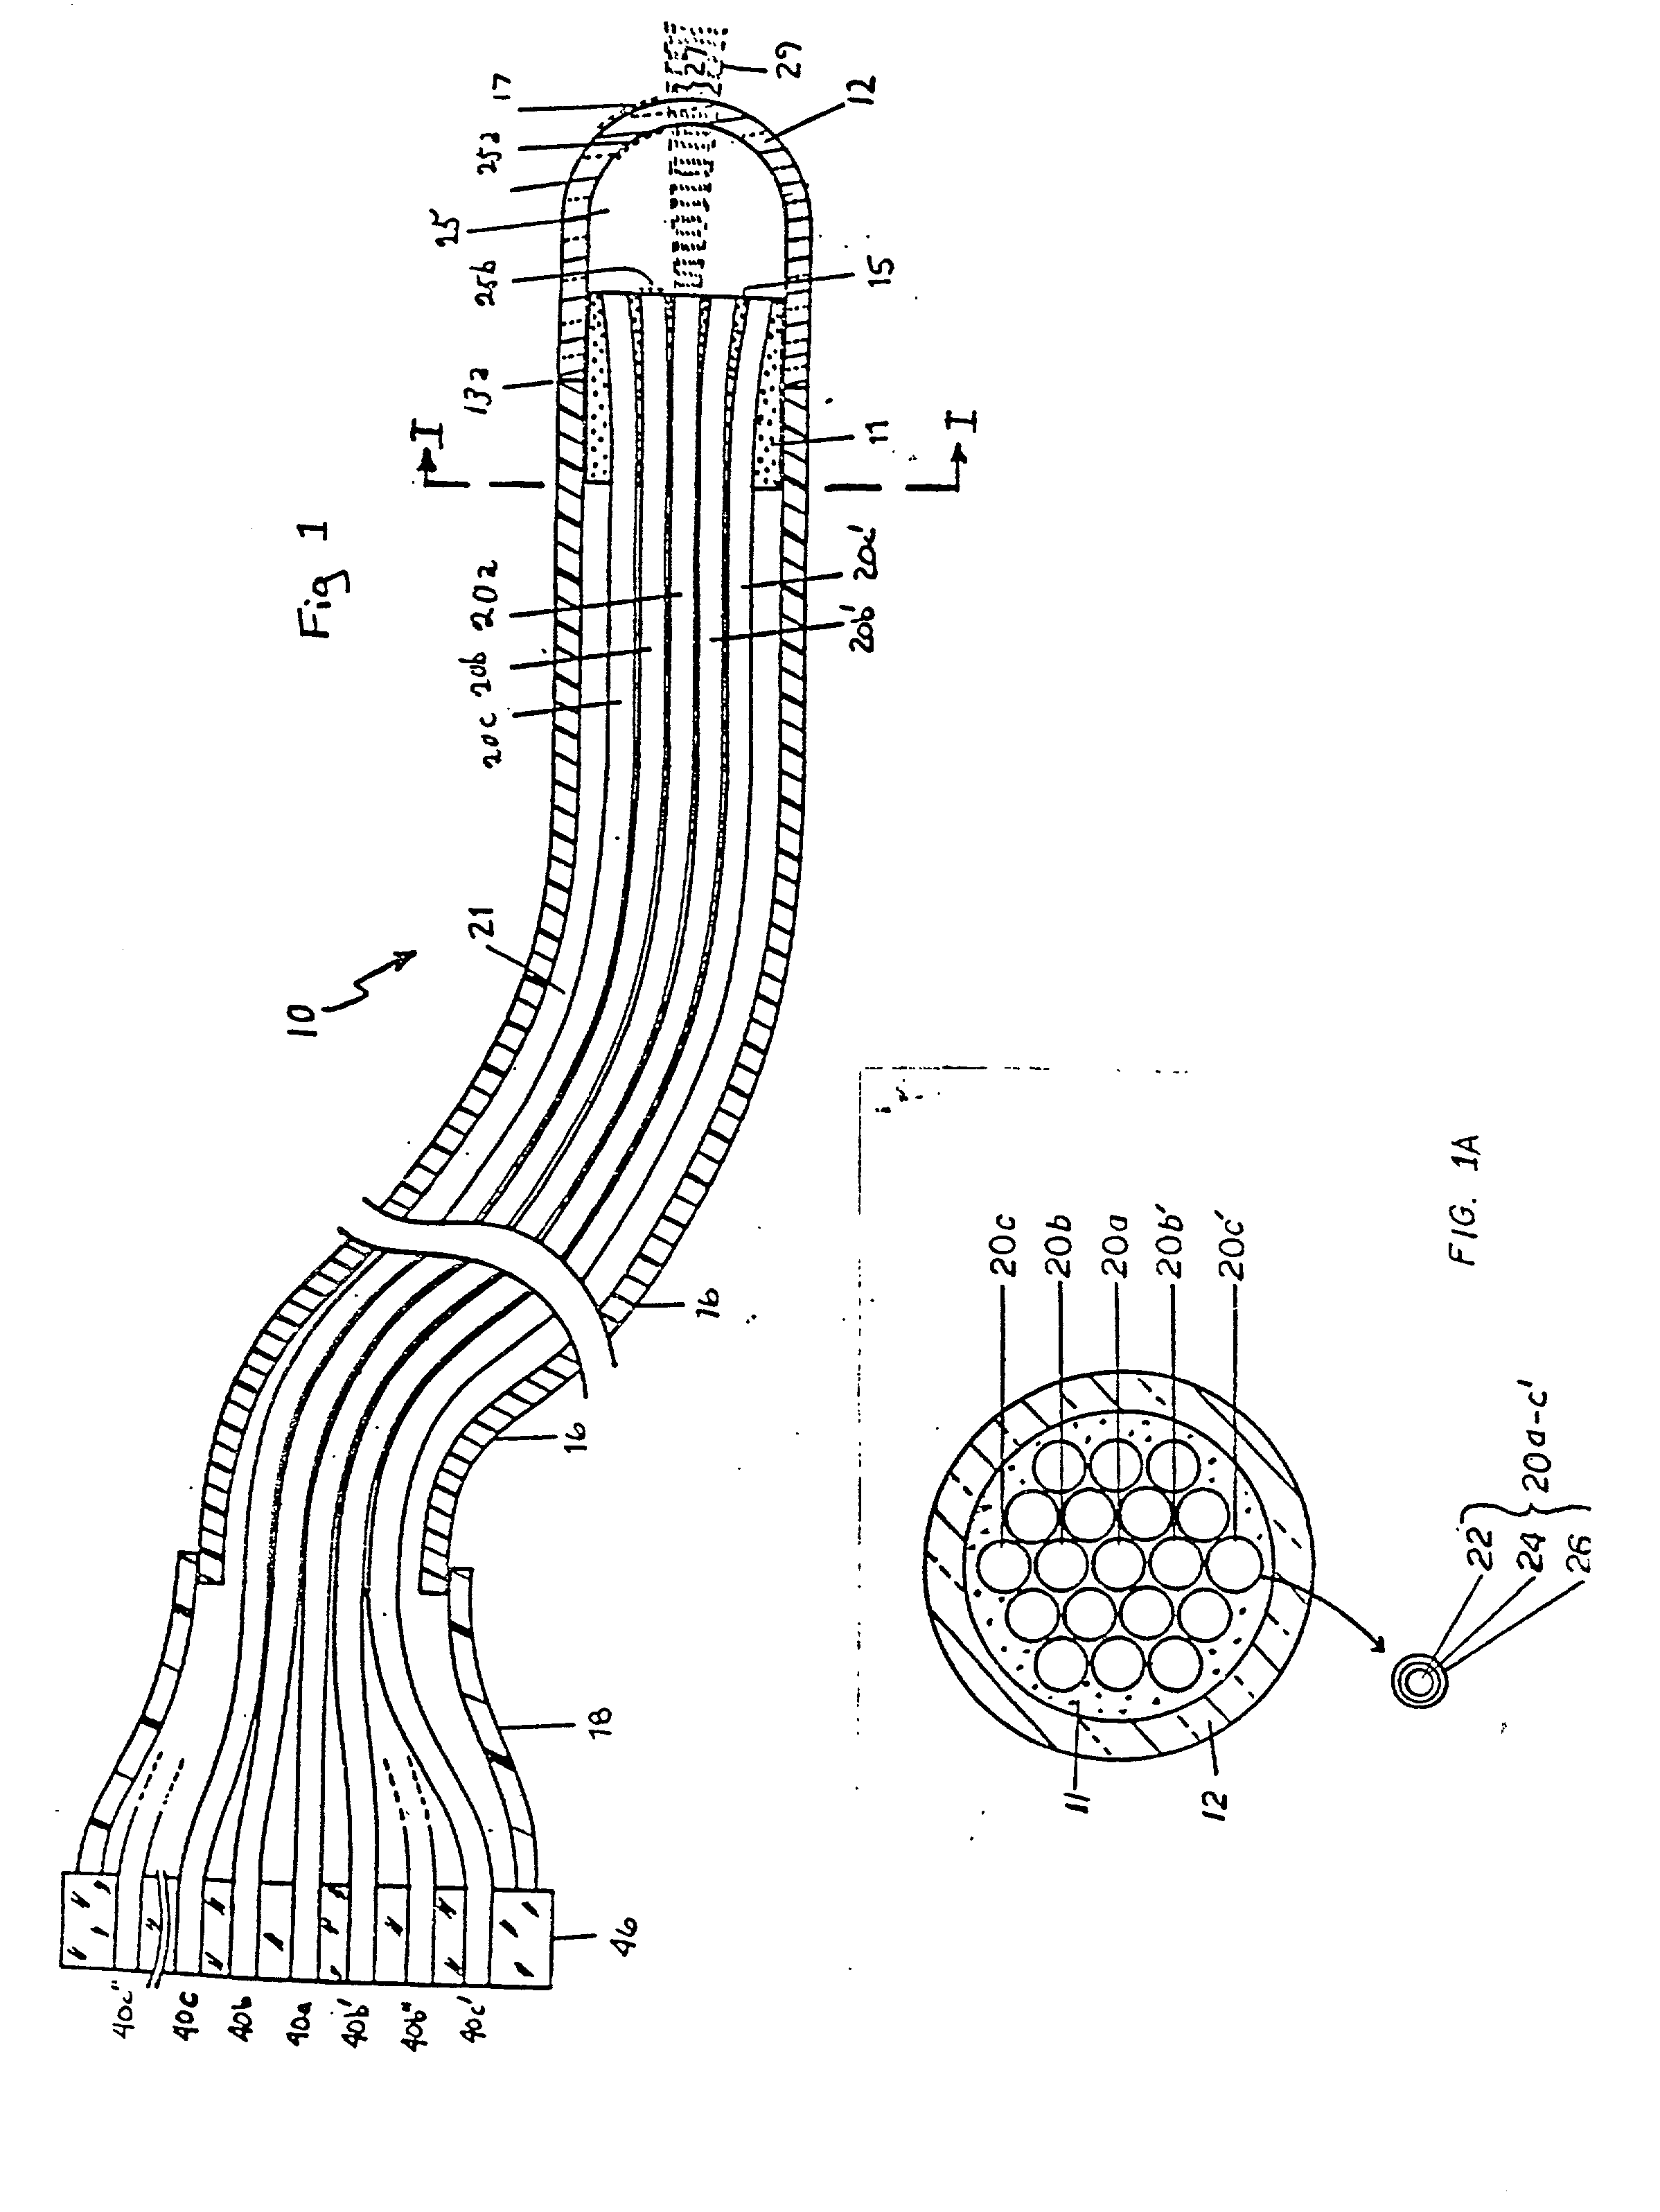 Laser ablation process and apparatus